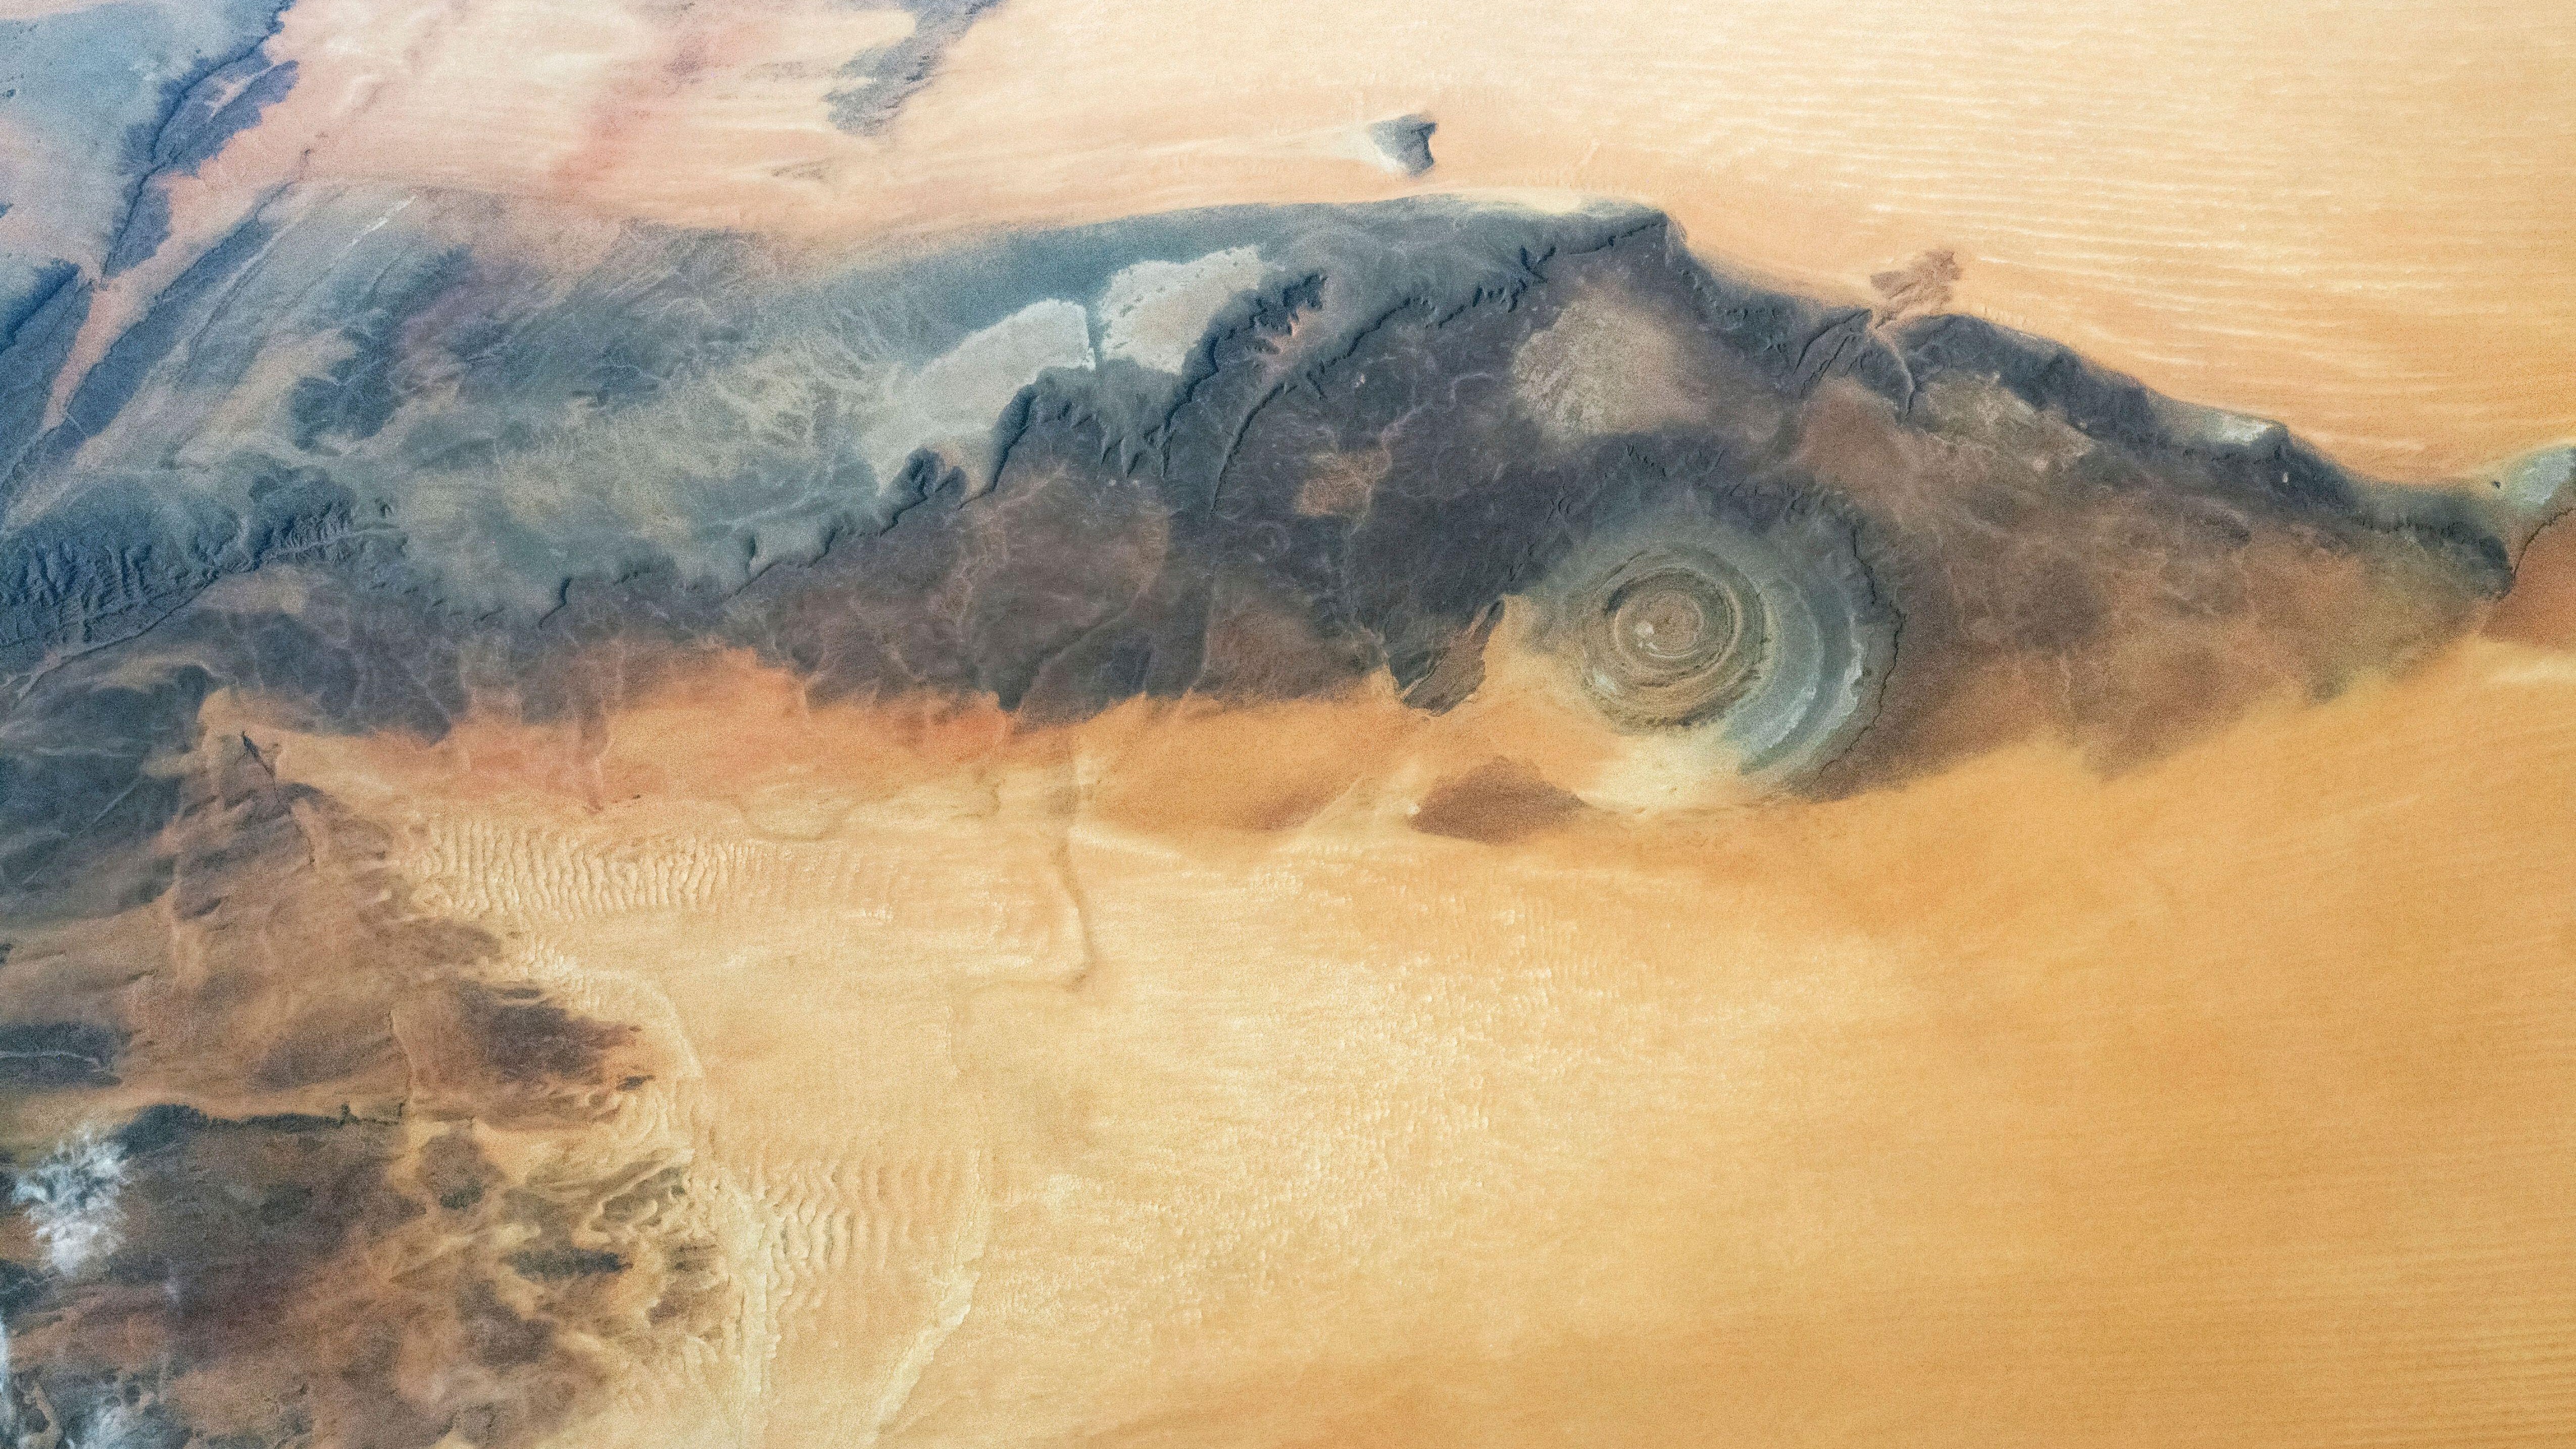 A view from space of the Rishaat structures showing the surrounding sand dunes.